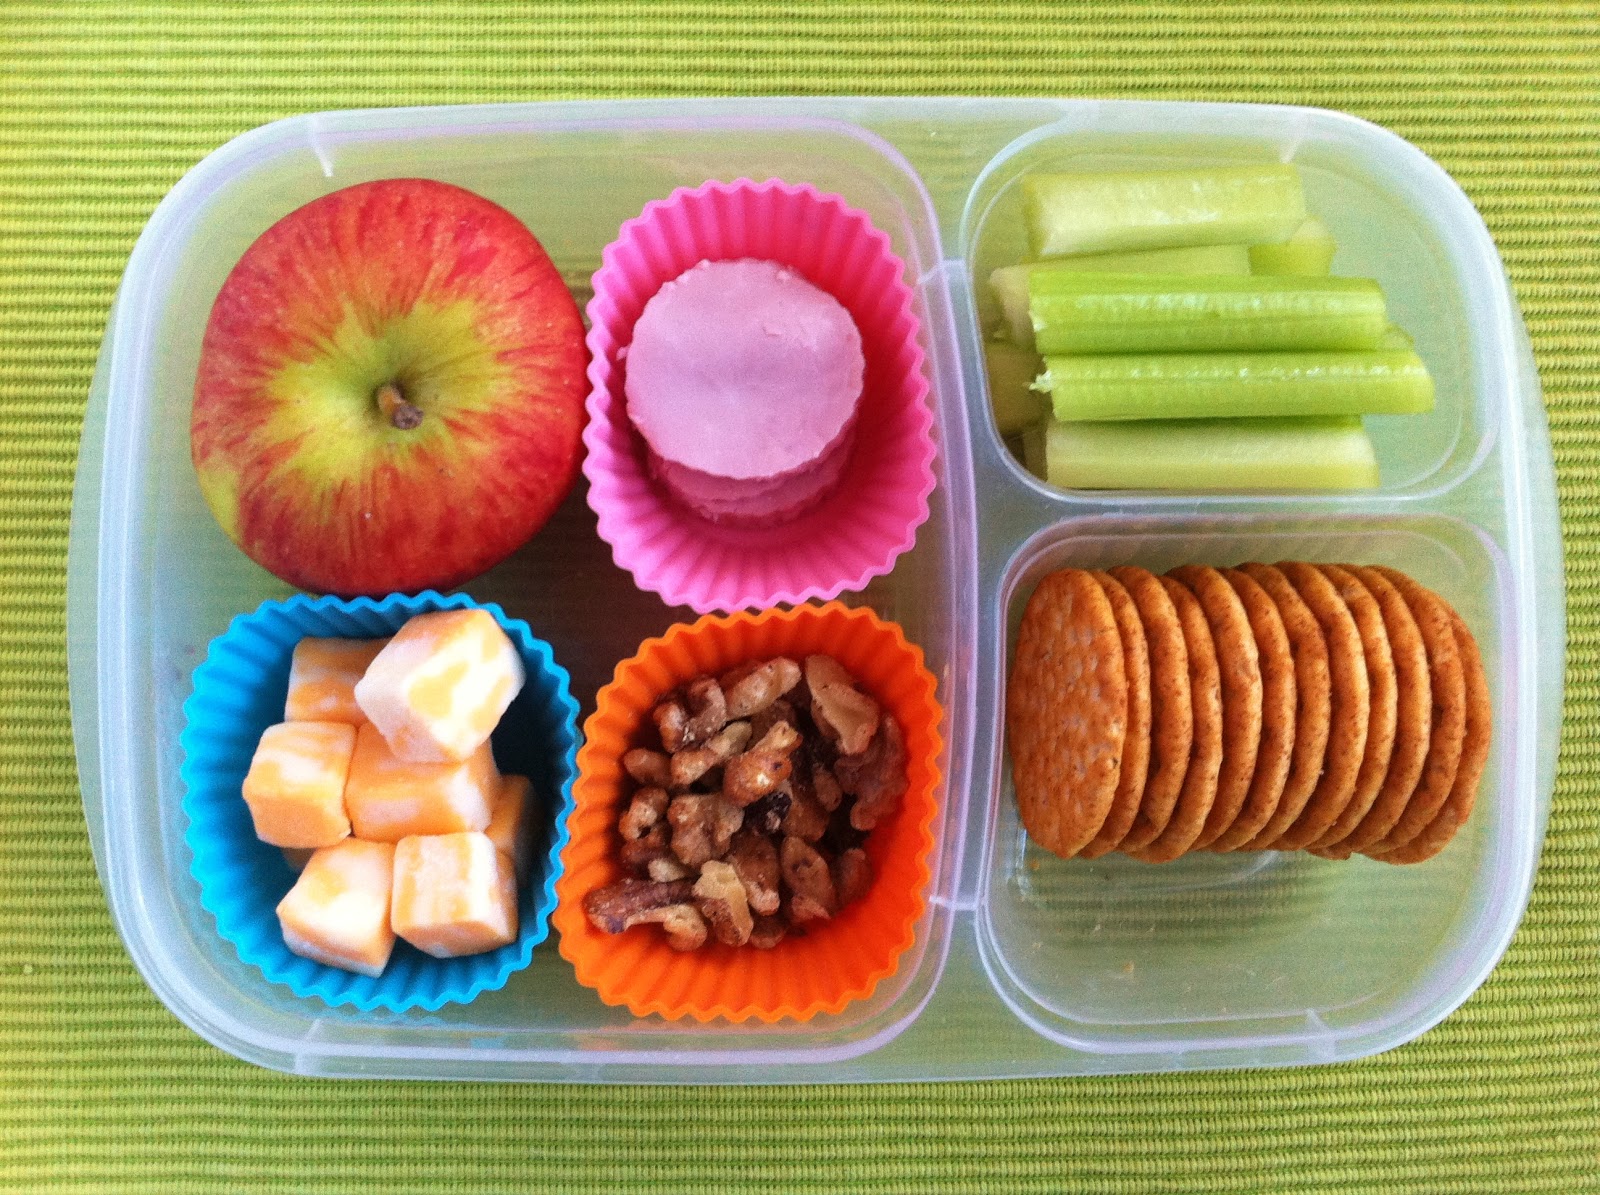 Operation: Lunch Box: Day 65 - Lunchables for Grownups